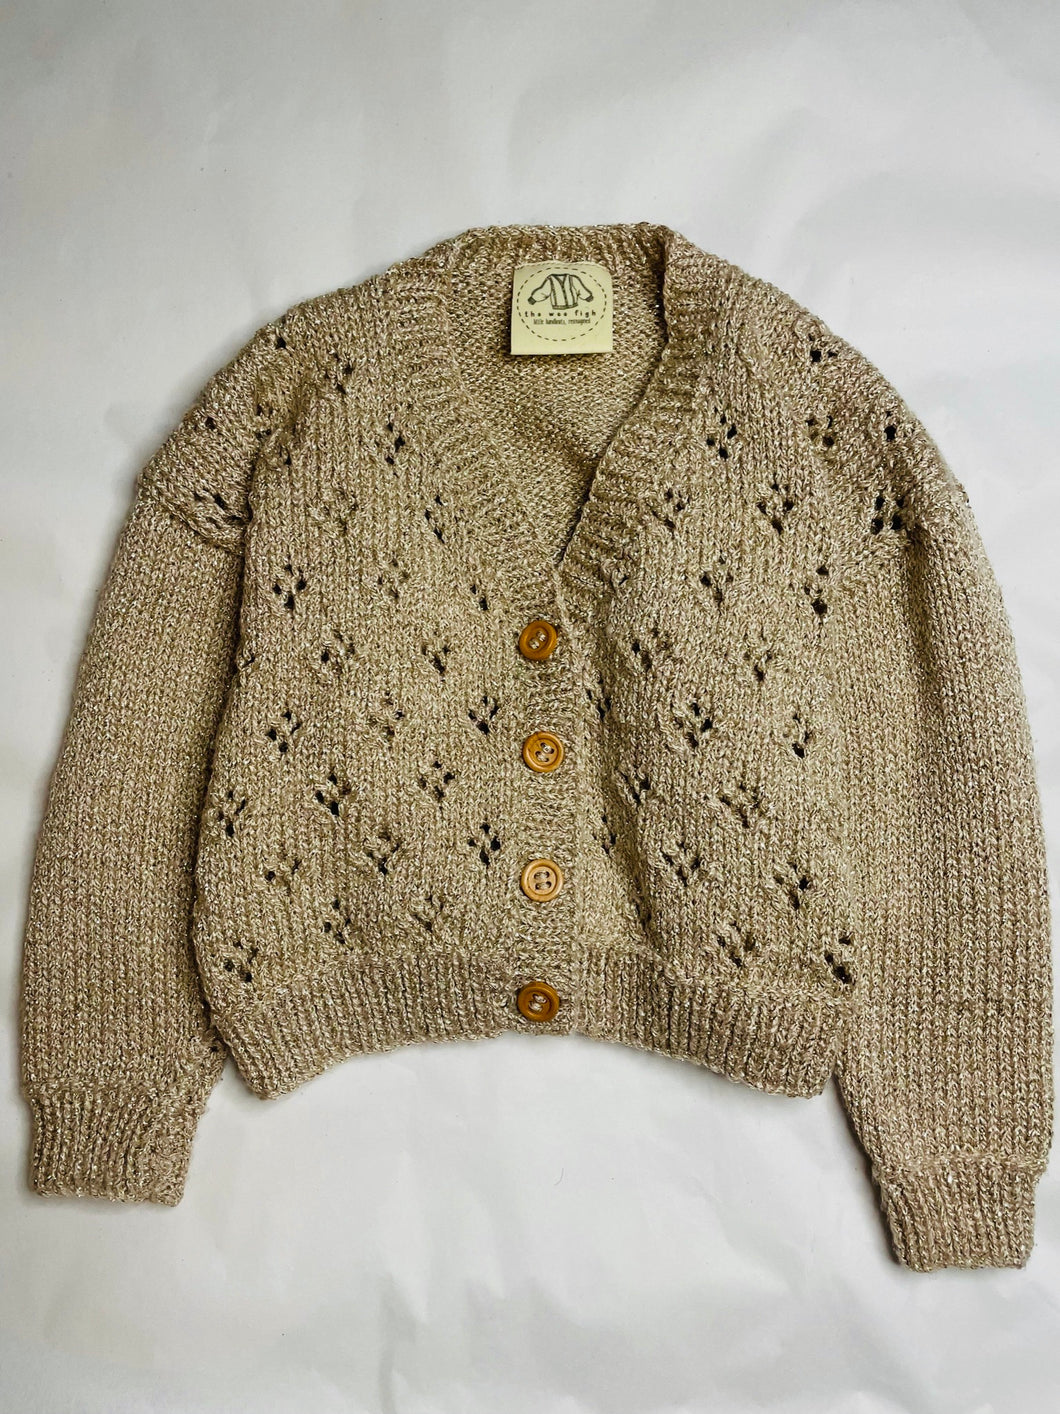 06-12 months - Gold sparkly cardigan